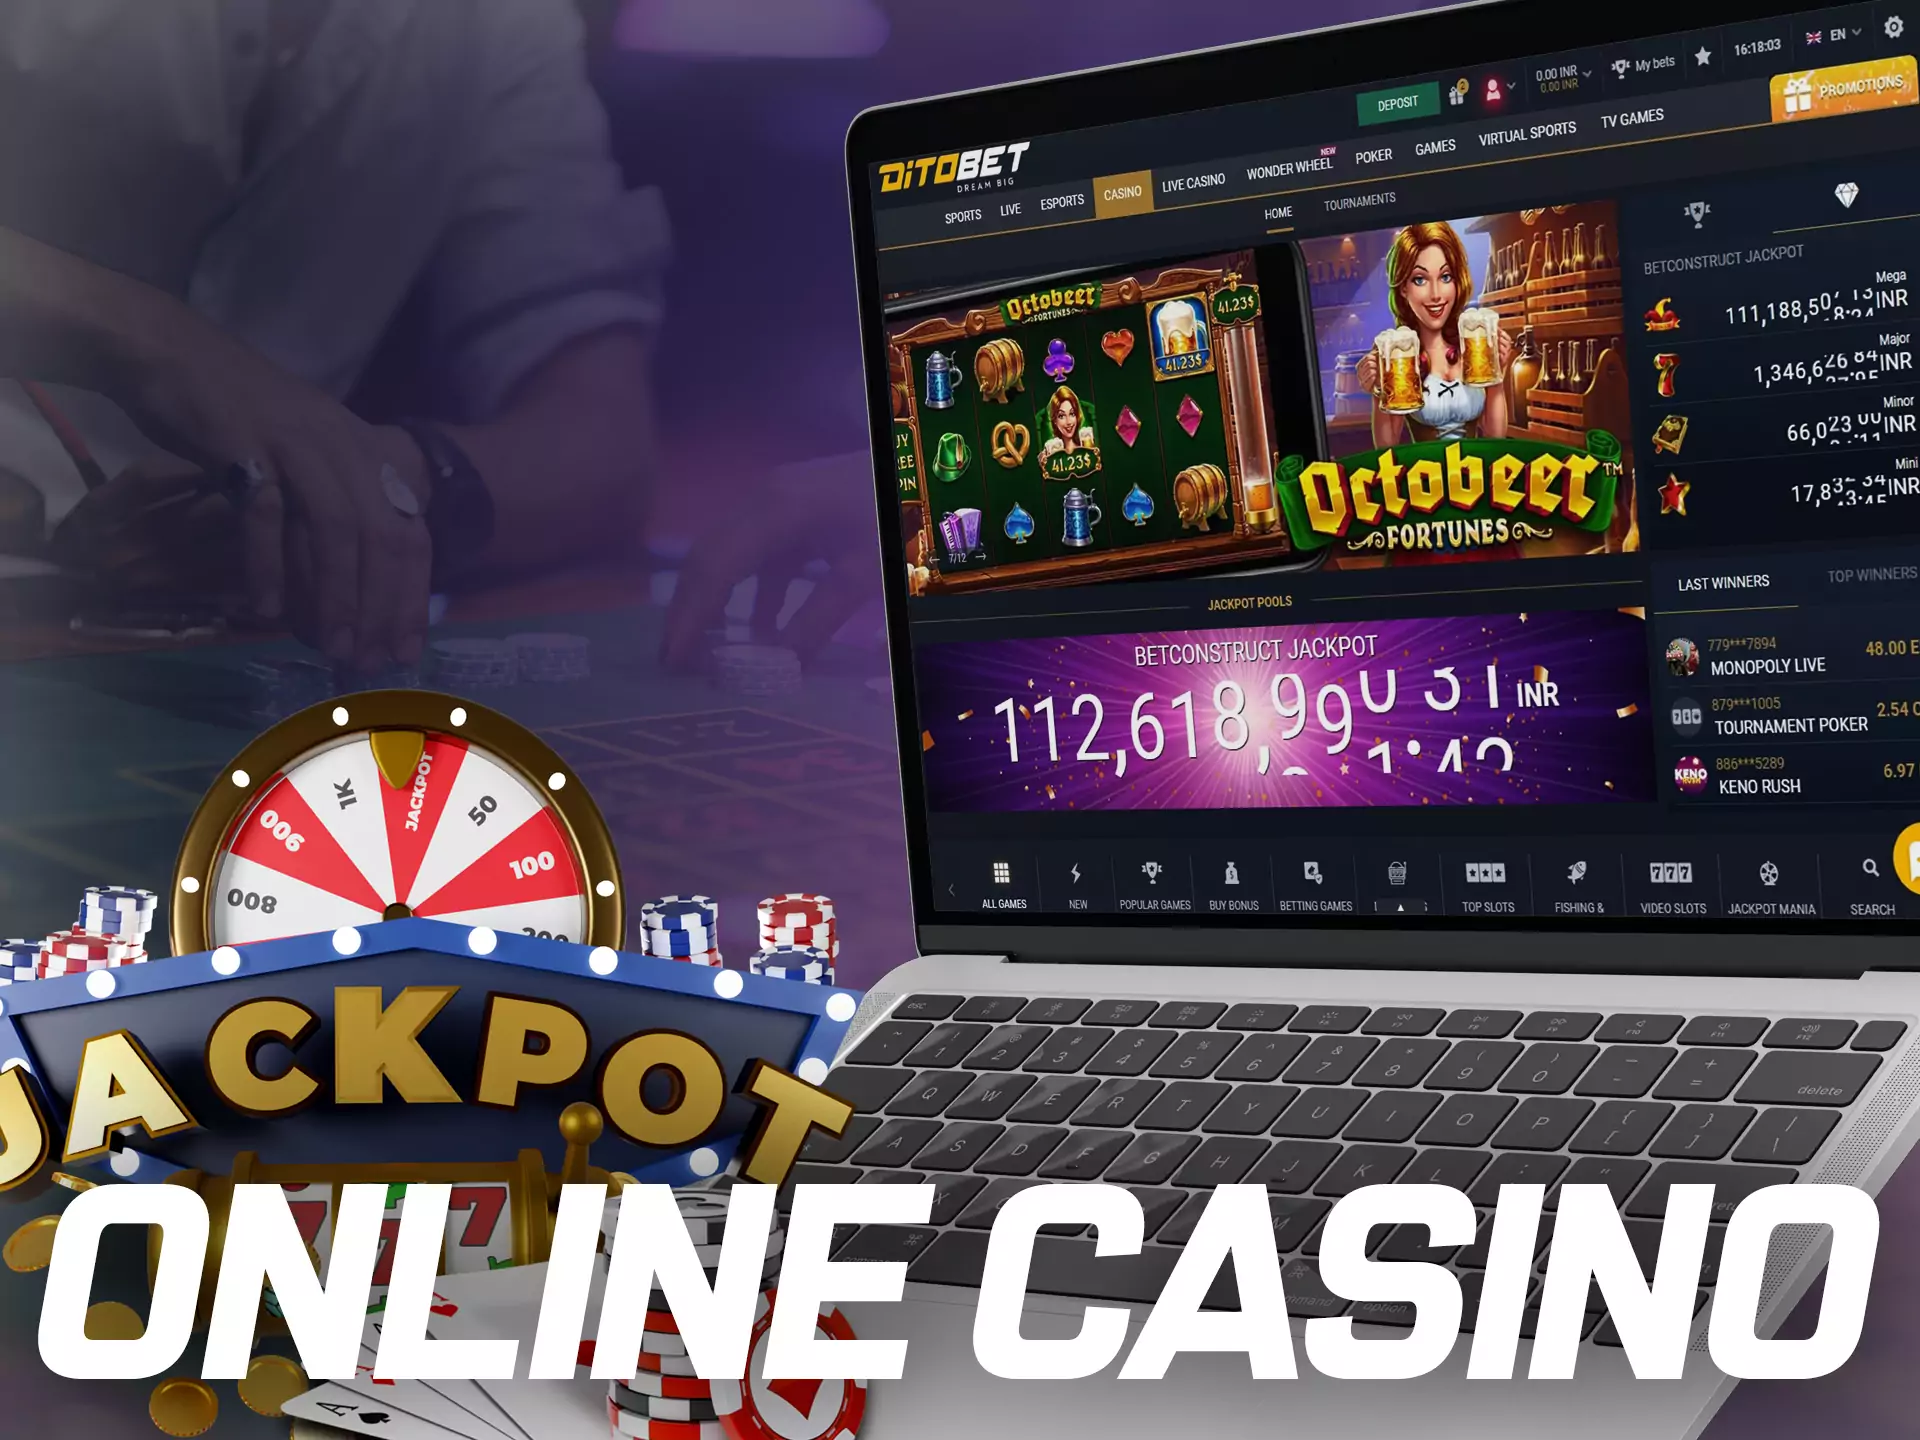 Play with pleasure at Ditobet online casino, choose your favorite games.